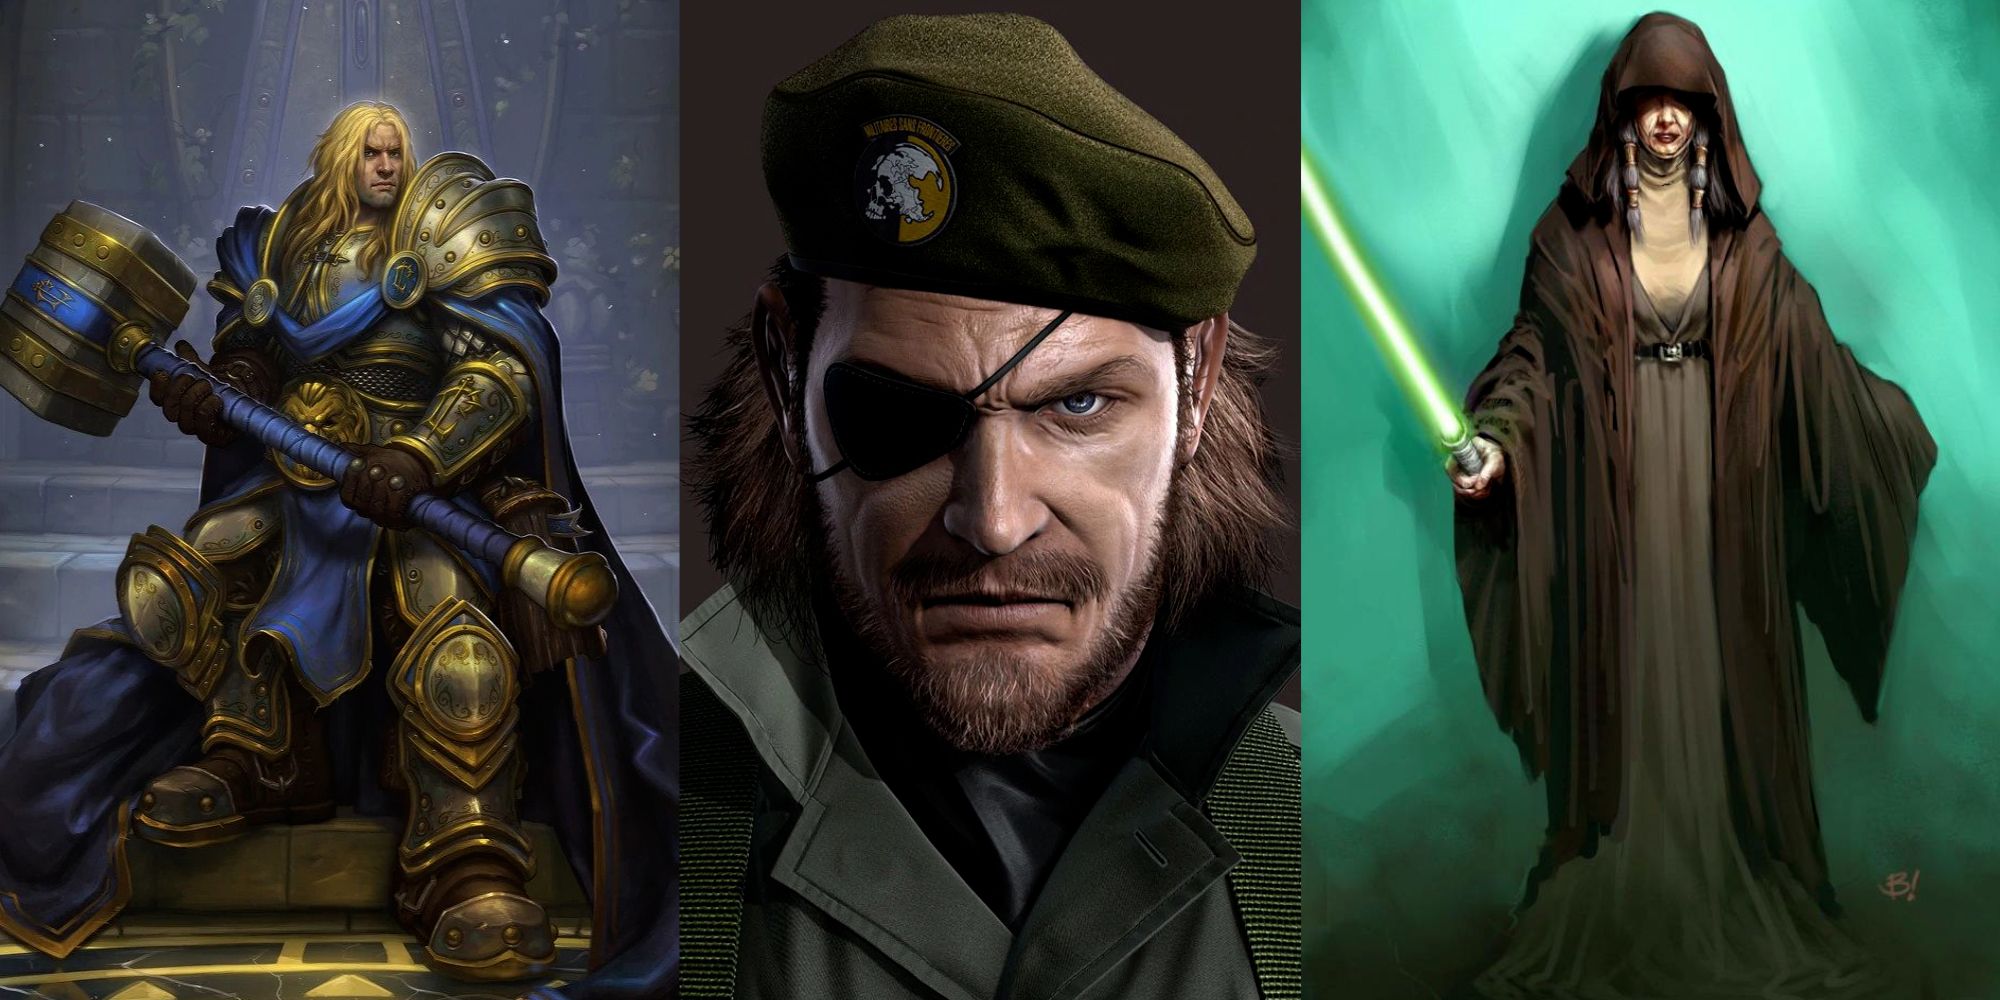 Banner Image Depicting Prince Arthas from Warcraft on the Left, Big Boss From Metal Gear Centre and Kreia from KOTOR 2 on The Right